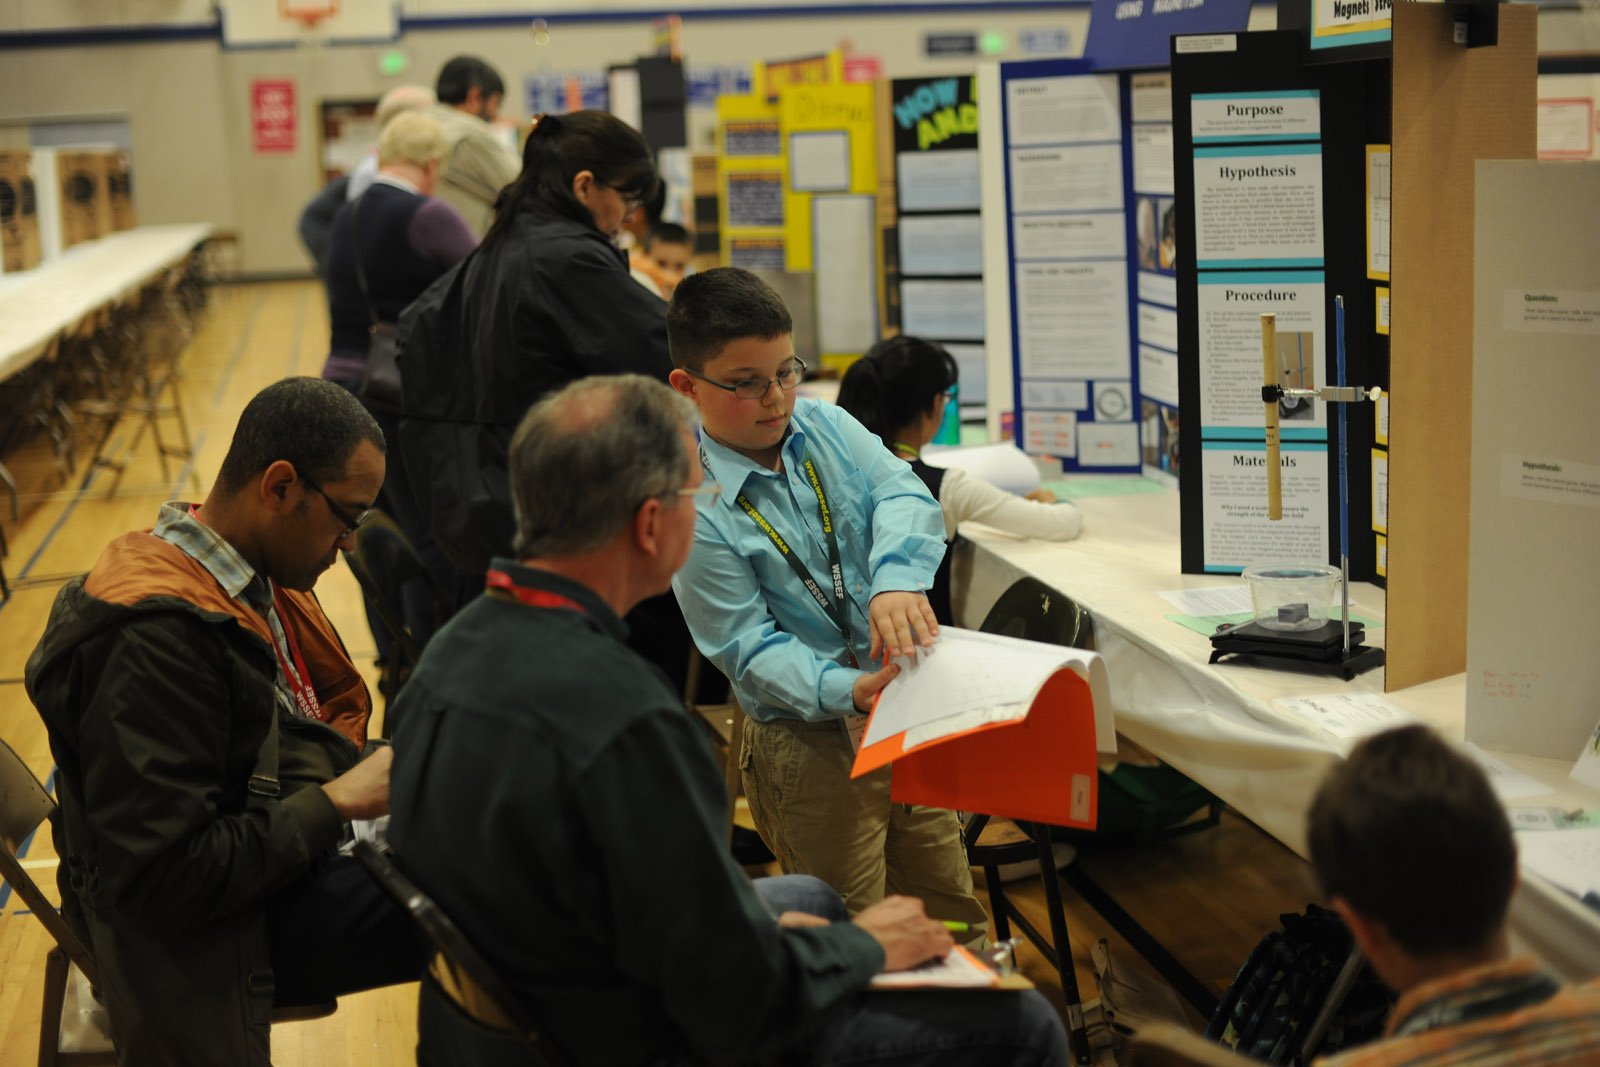 Science Fair 2016-04-01 by Mike Bay D3X 274